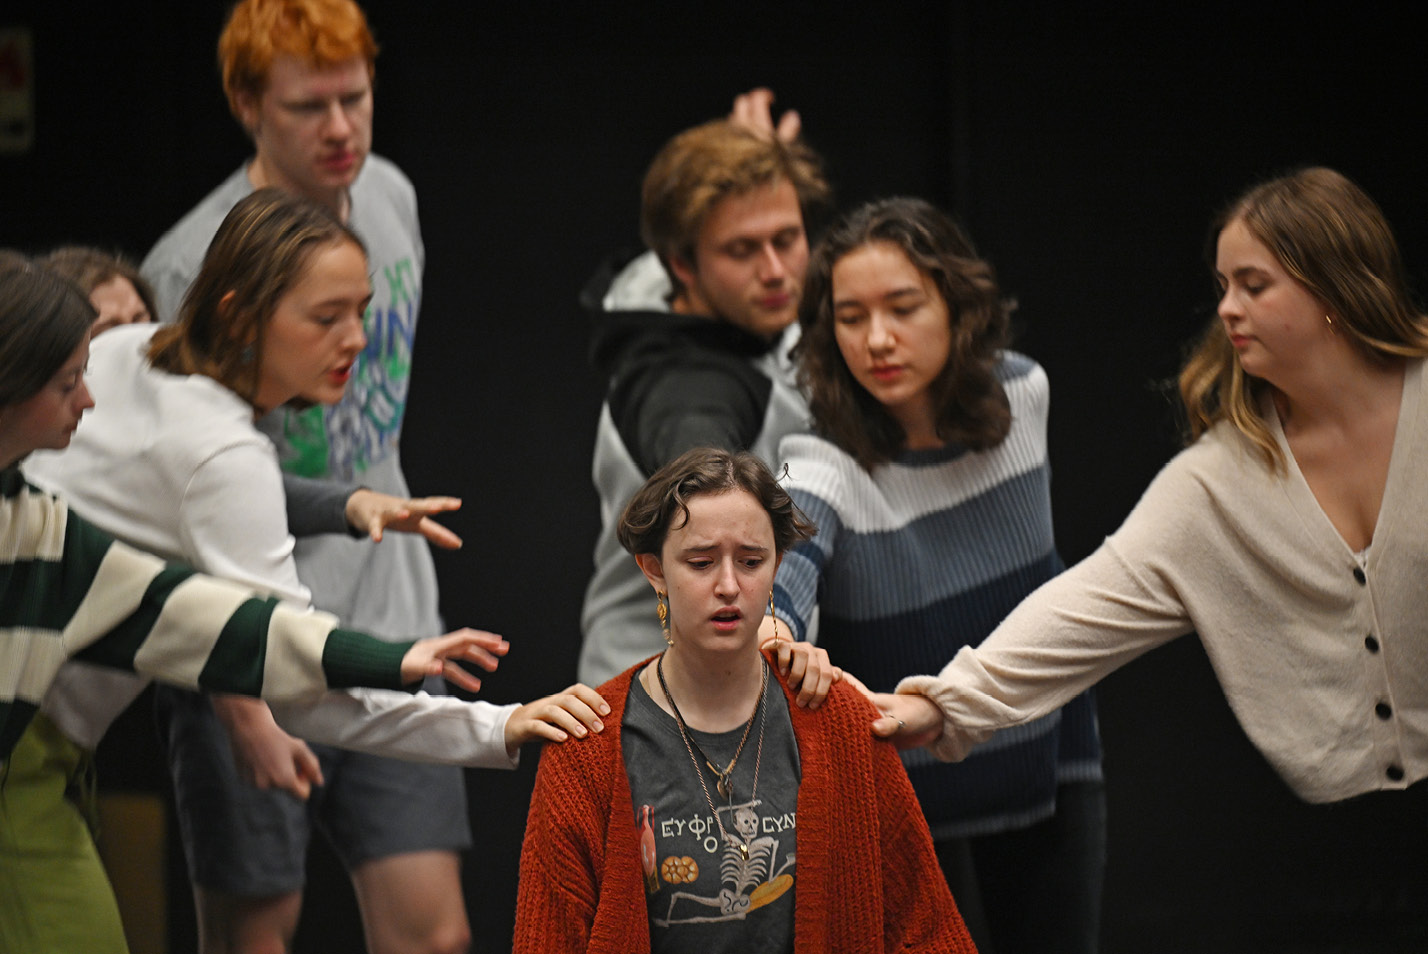 Adjunct Associate Professor of Theater Jessica Cerullo works with her students in her Acting 1 Preparation class.